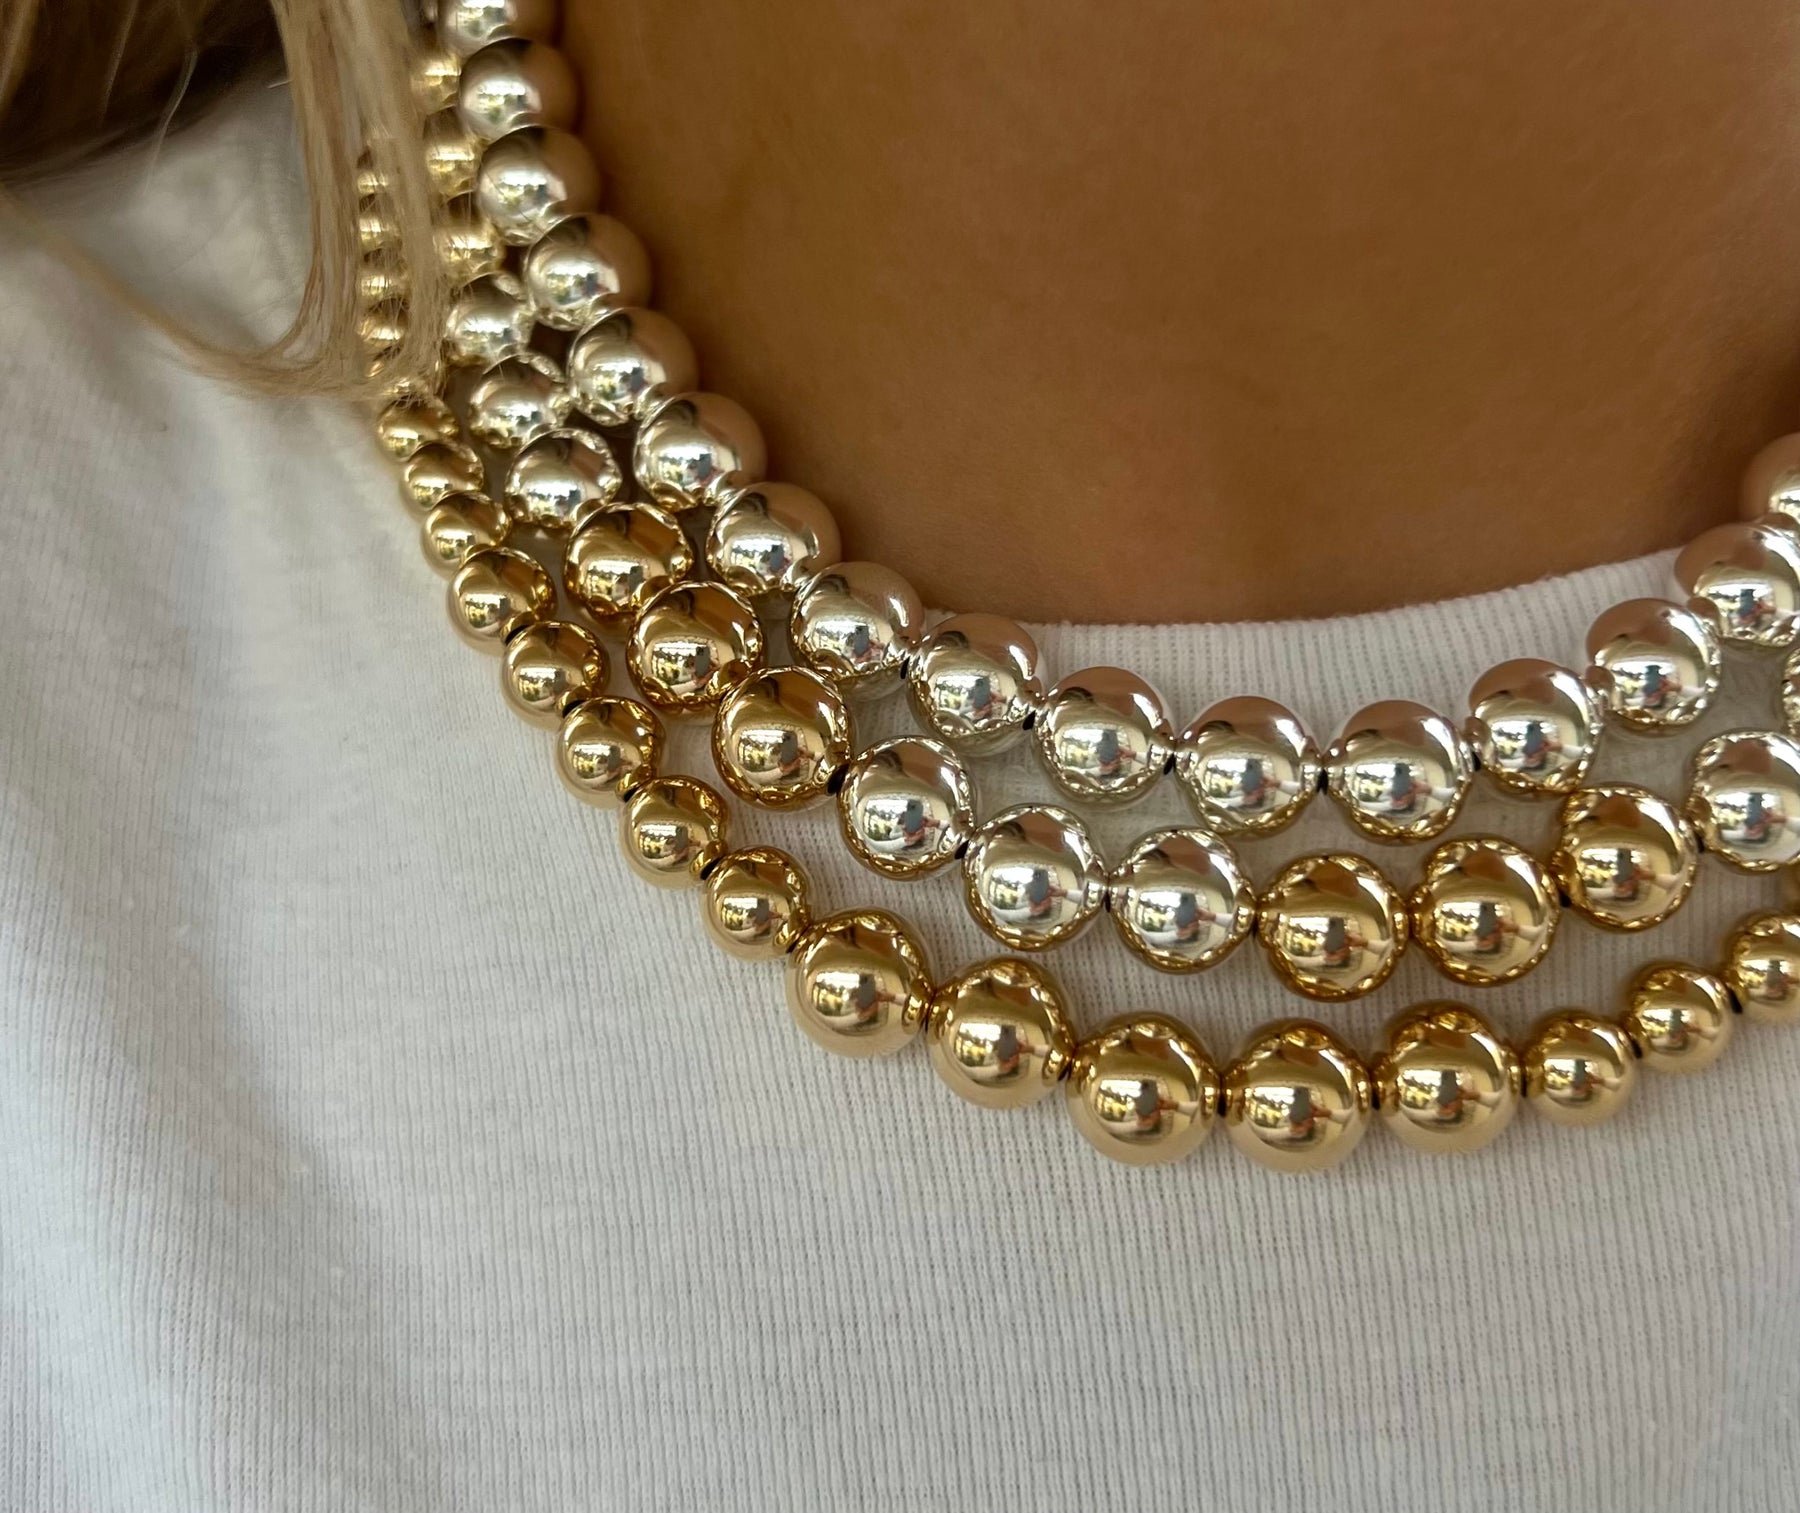 Close-up of a layered gold bead and crystal necklace on a white shirt.